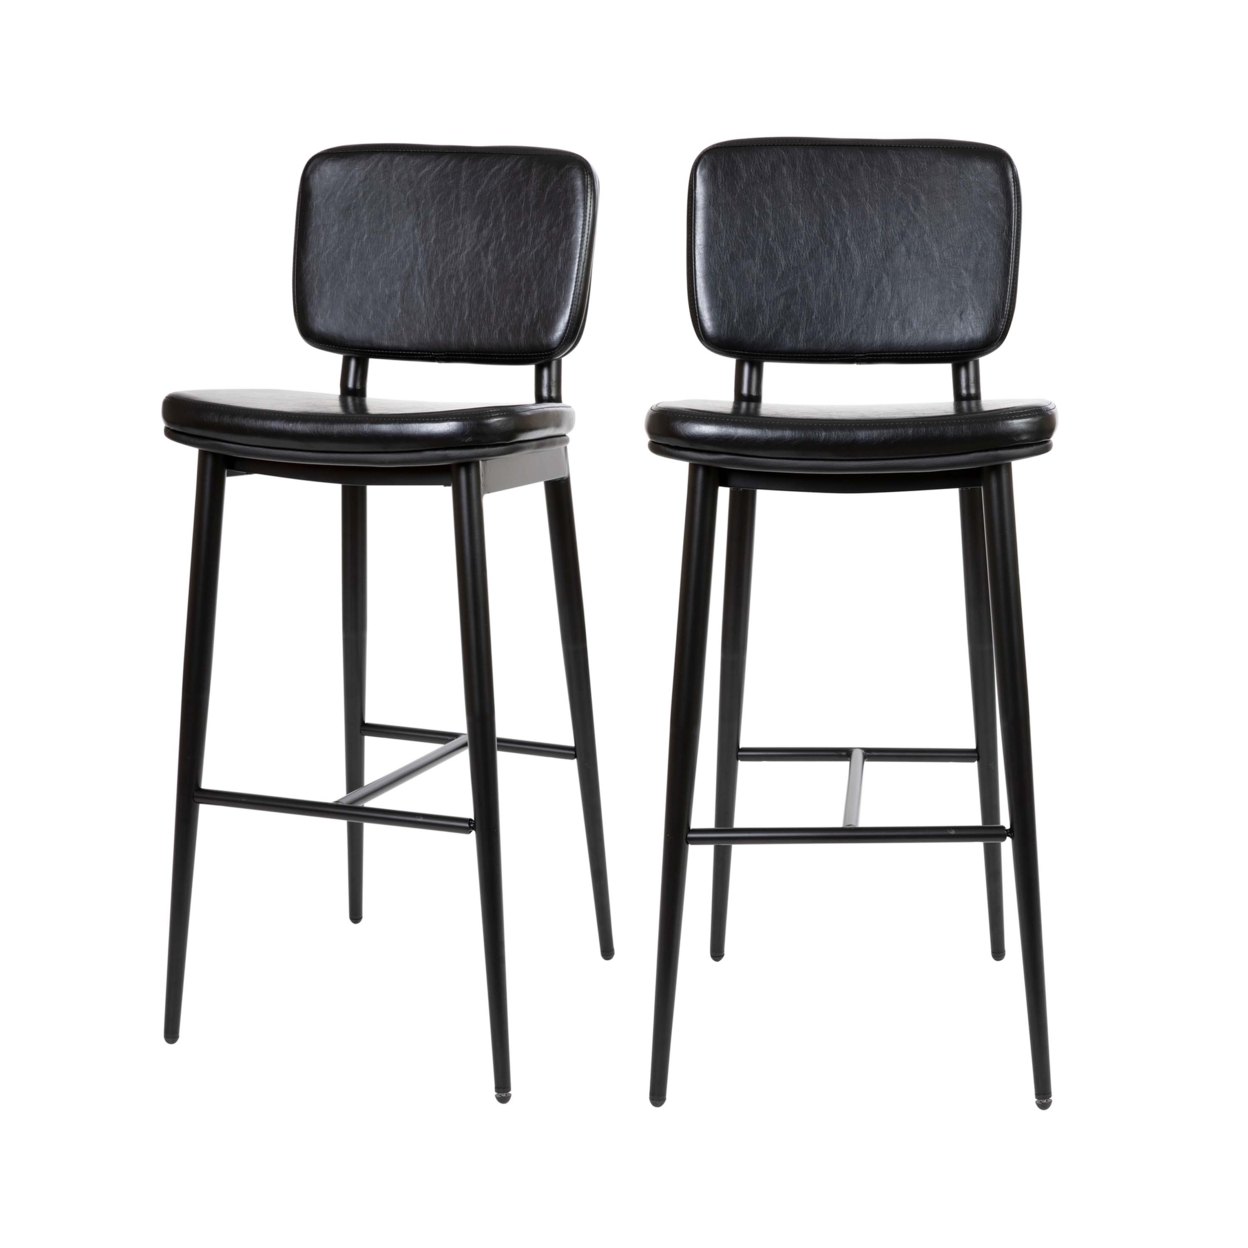 Kenzie Commercial Grade Mid-Back Barstools - Black LeatherSoft Upholstery - Black Iron Frame With Integrated Footrest - Set Of 2